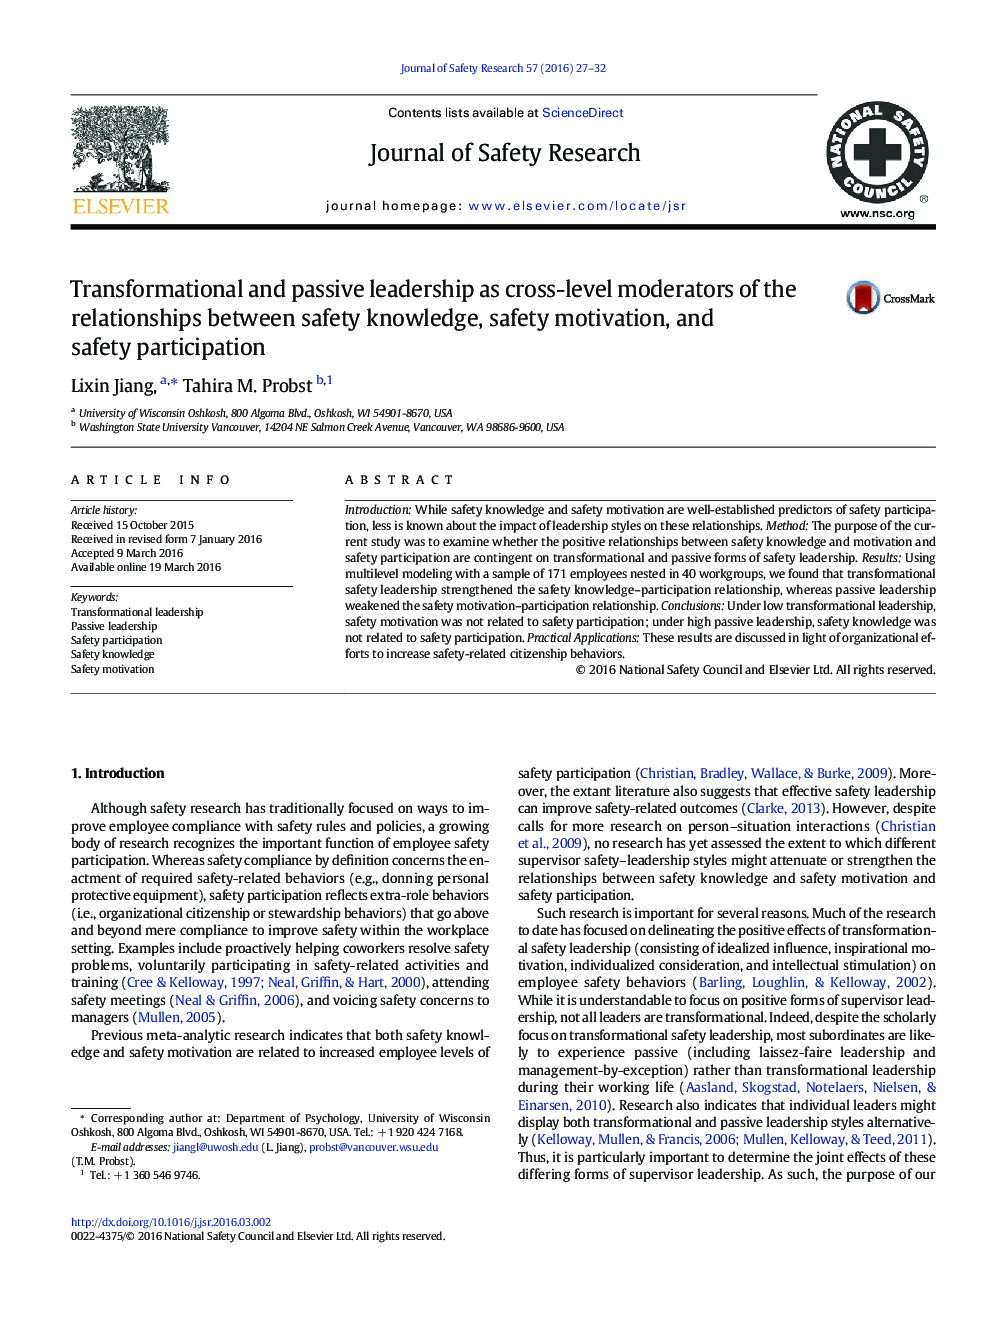 Transformational and passive leadership as cross-level moderators of the relationships between safety knowledge, safety motivation, and safety participation